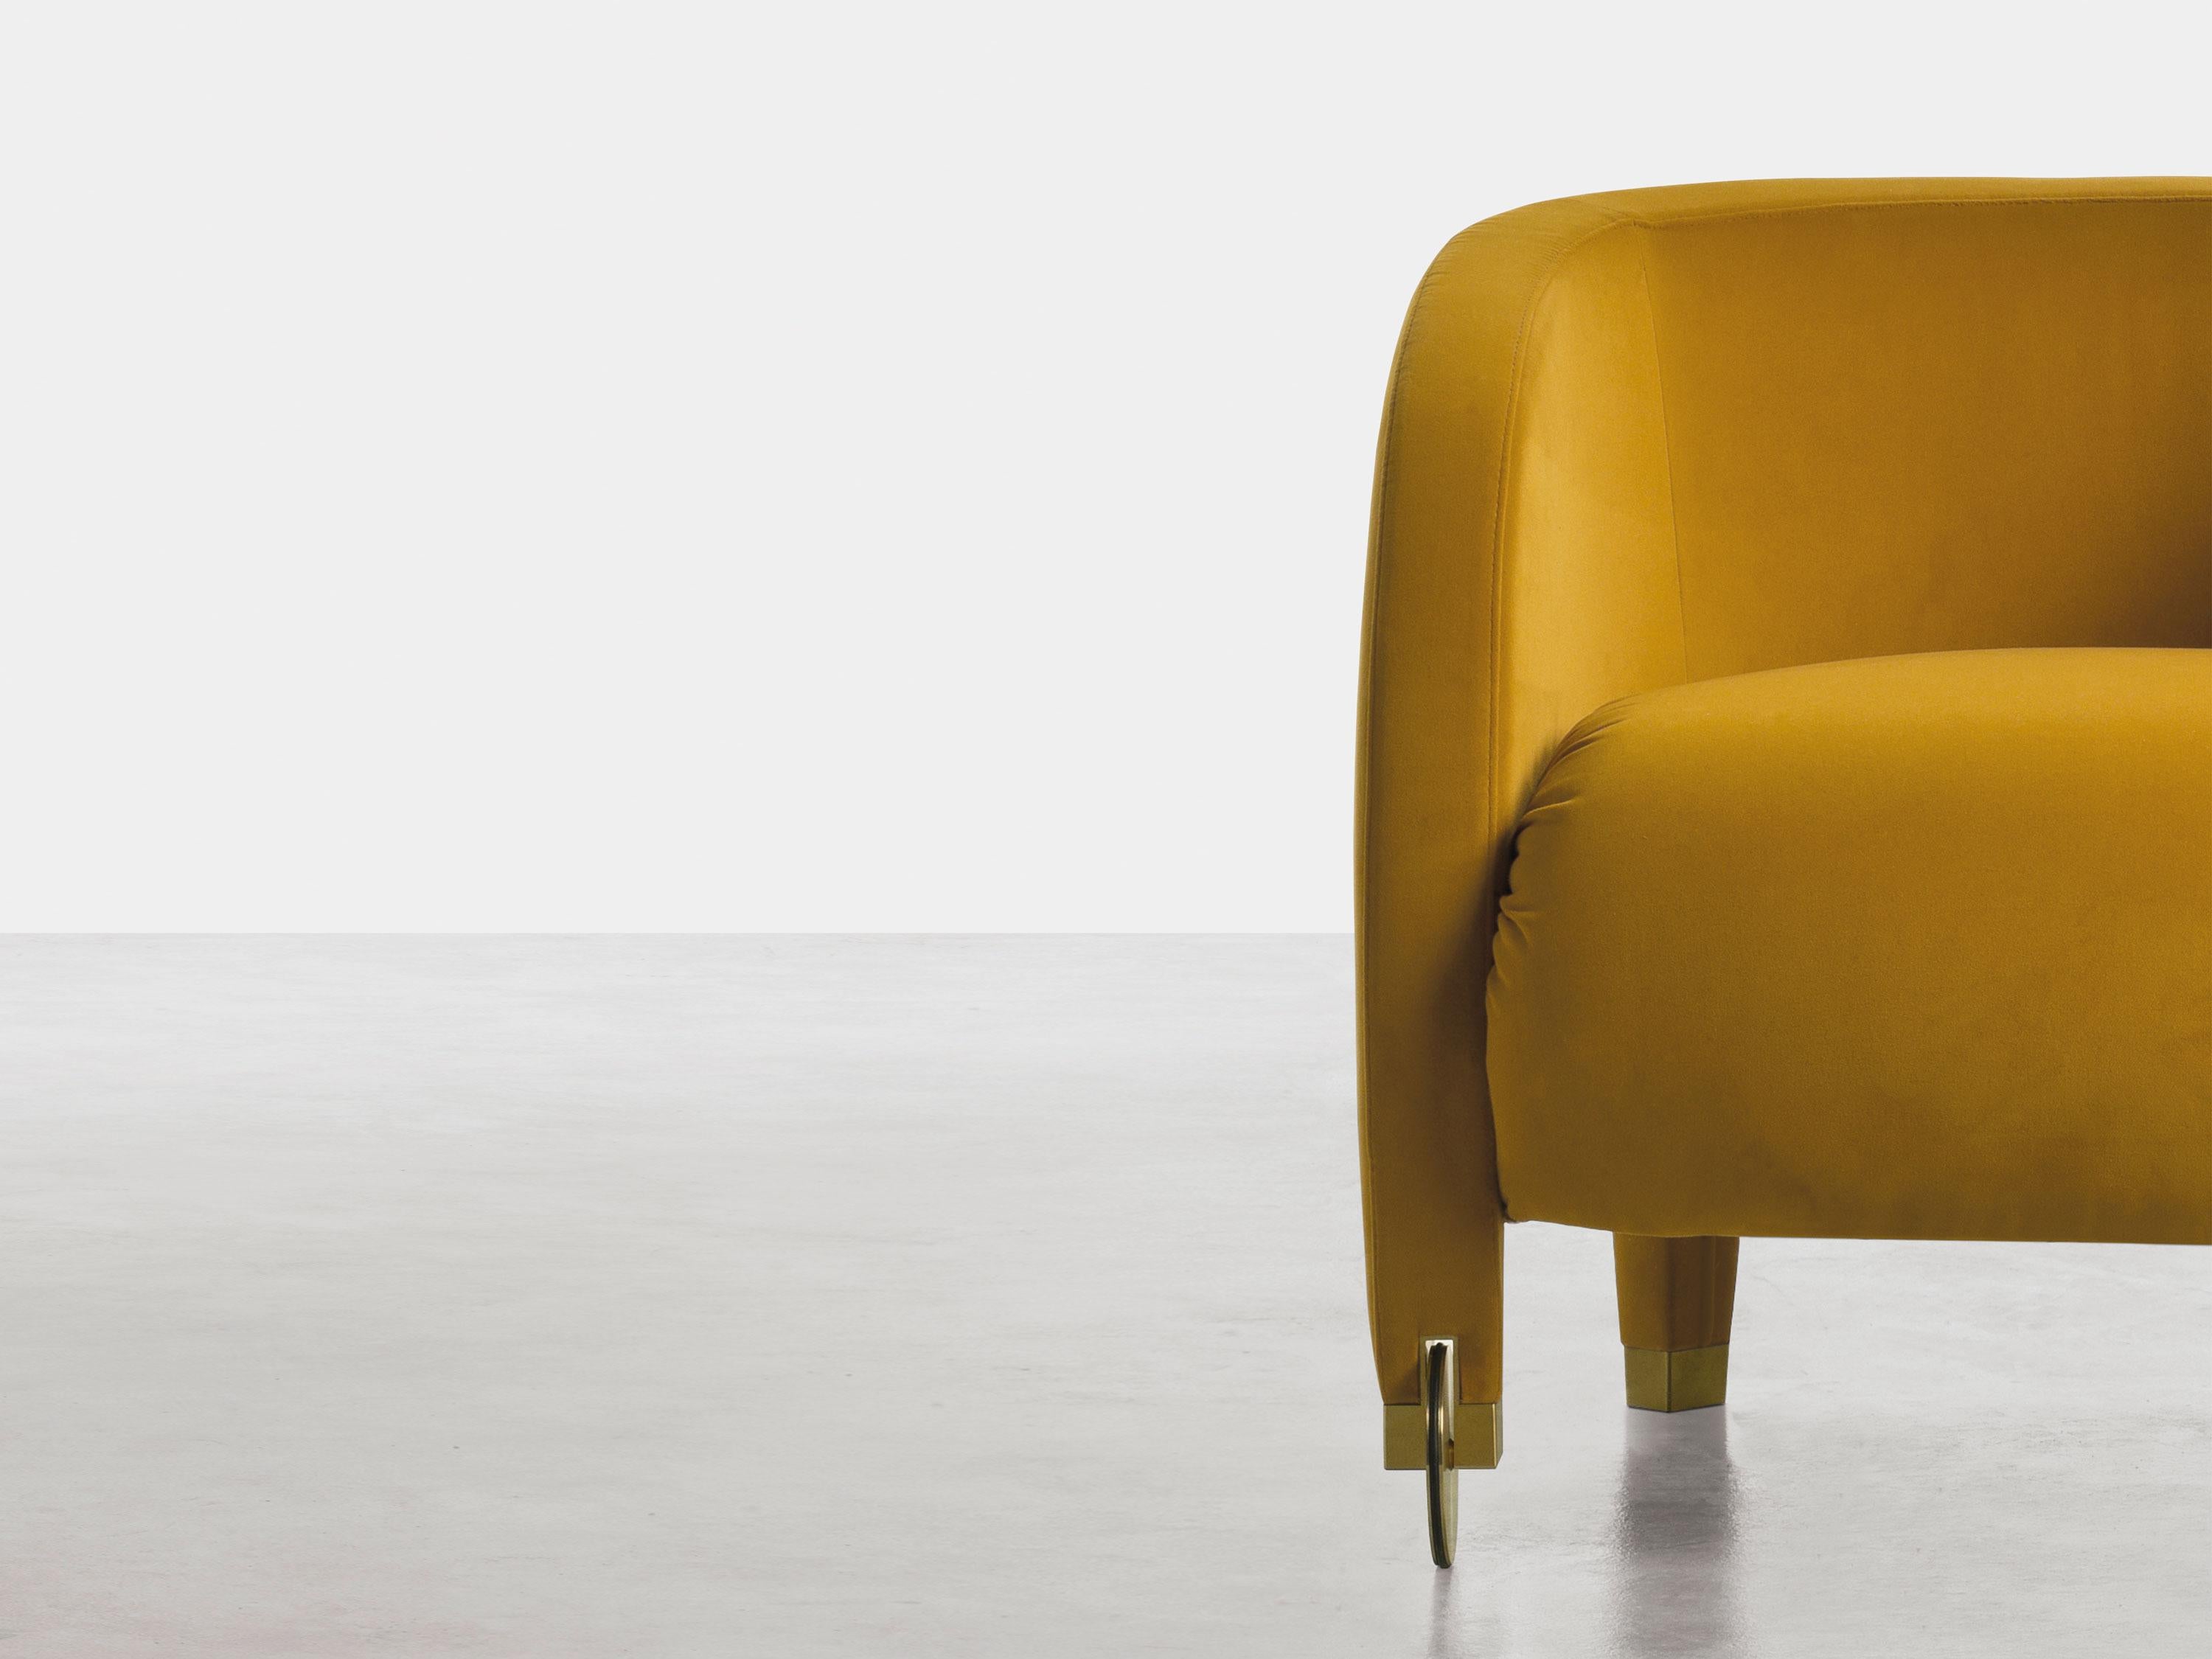 A small armchair, with a deliberately outsized and conspicuous wheel. Adele is soft, round, elegant yet ironic.
Brass and bright colors, curves and tightly stretched fabrics, it could fit into any room and capture attention
in spite of its small